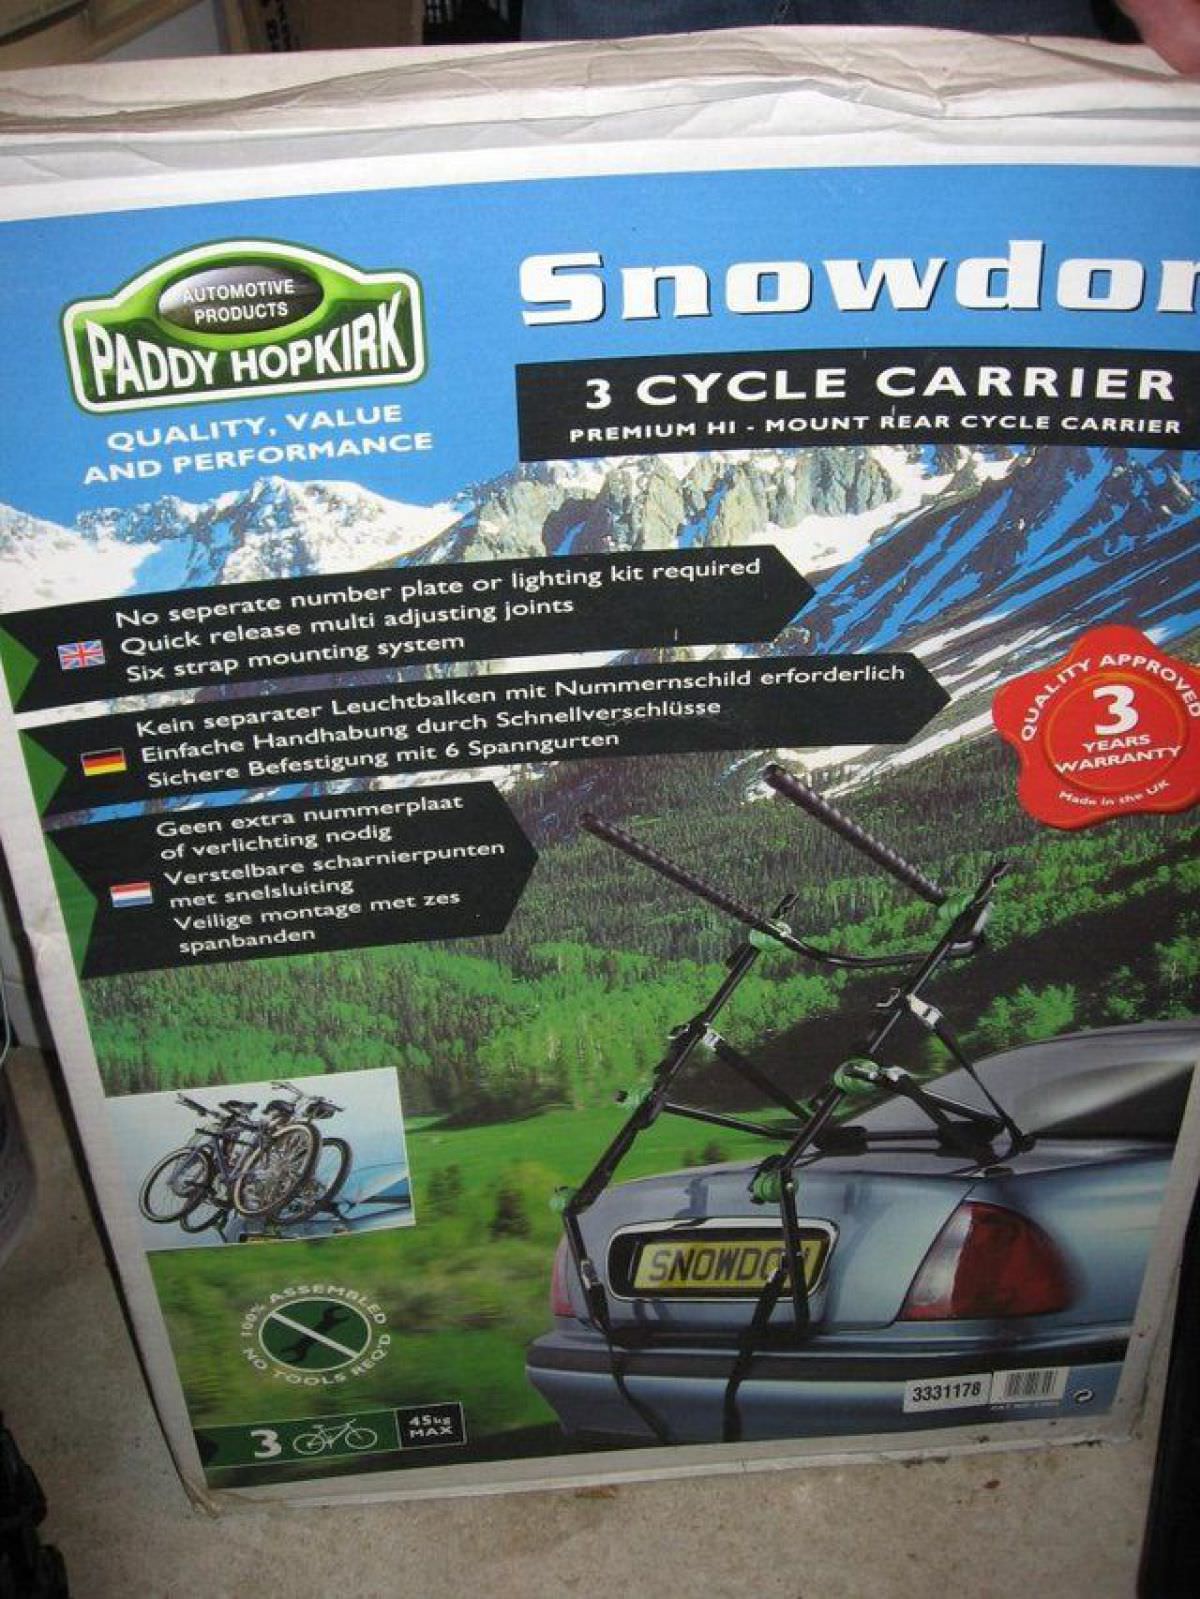 Snowden 3 Cycle Carrier - Automotive Paddy Hopkirk CM06